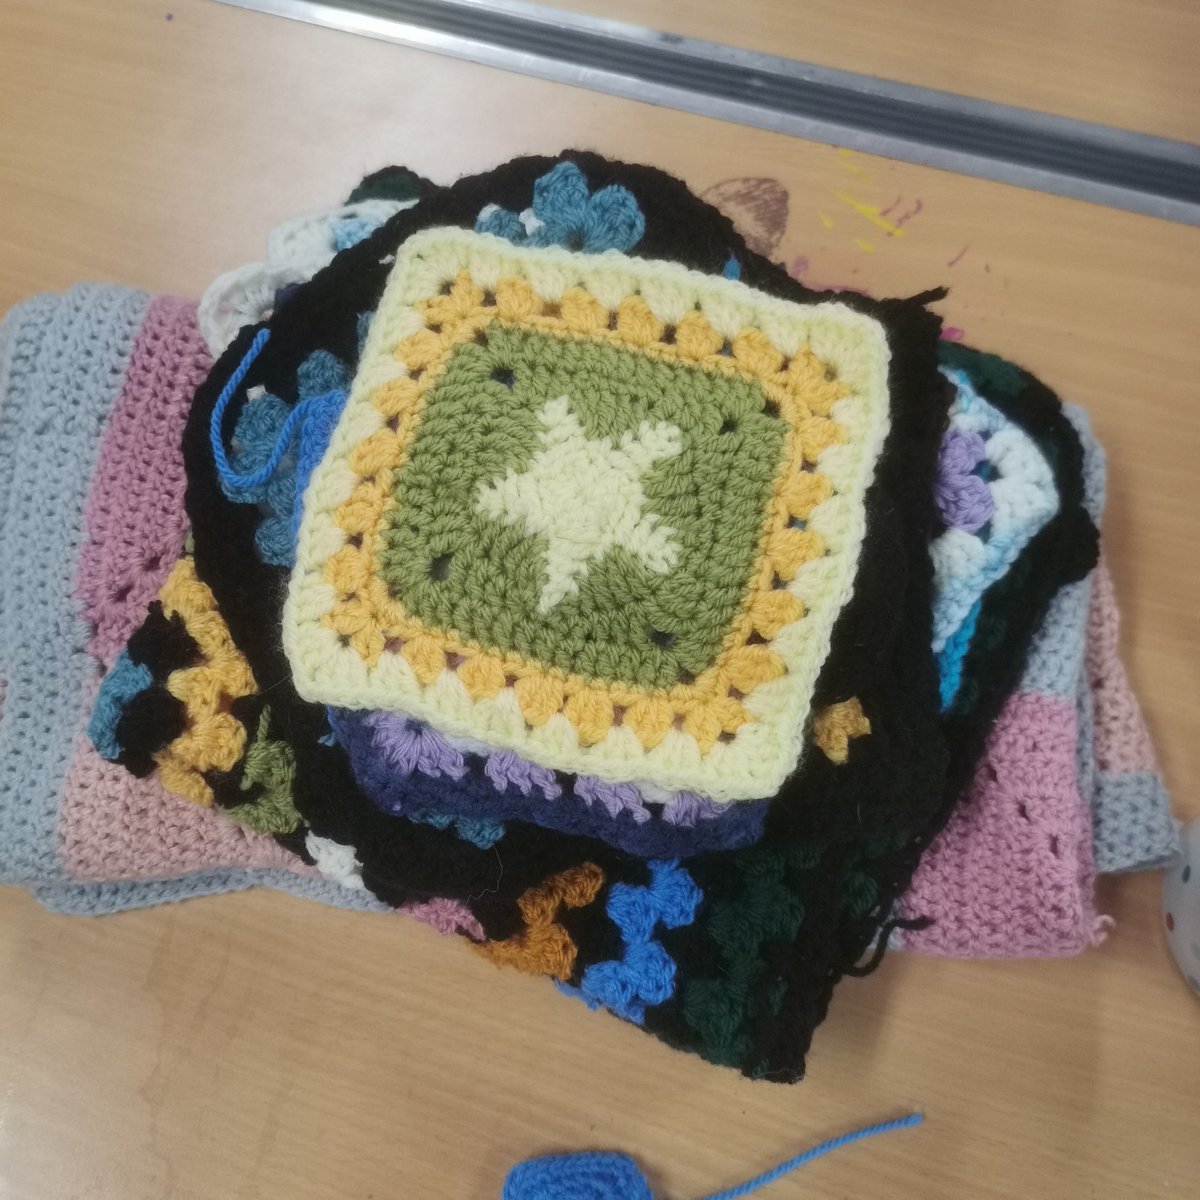 On Wednesday we also had Syretta's Knit and Knatter at Nowell Mount, where people were sharing their best tips and tricks 🧶 Have a look at all of the different granny squares everyone's been making! #leedscreative #leedscraft #leeds #leedslife #leedscommunity #leedscharity